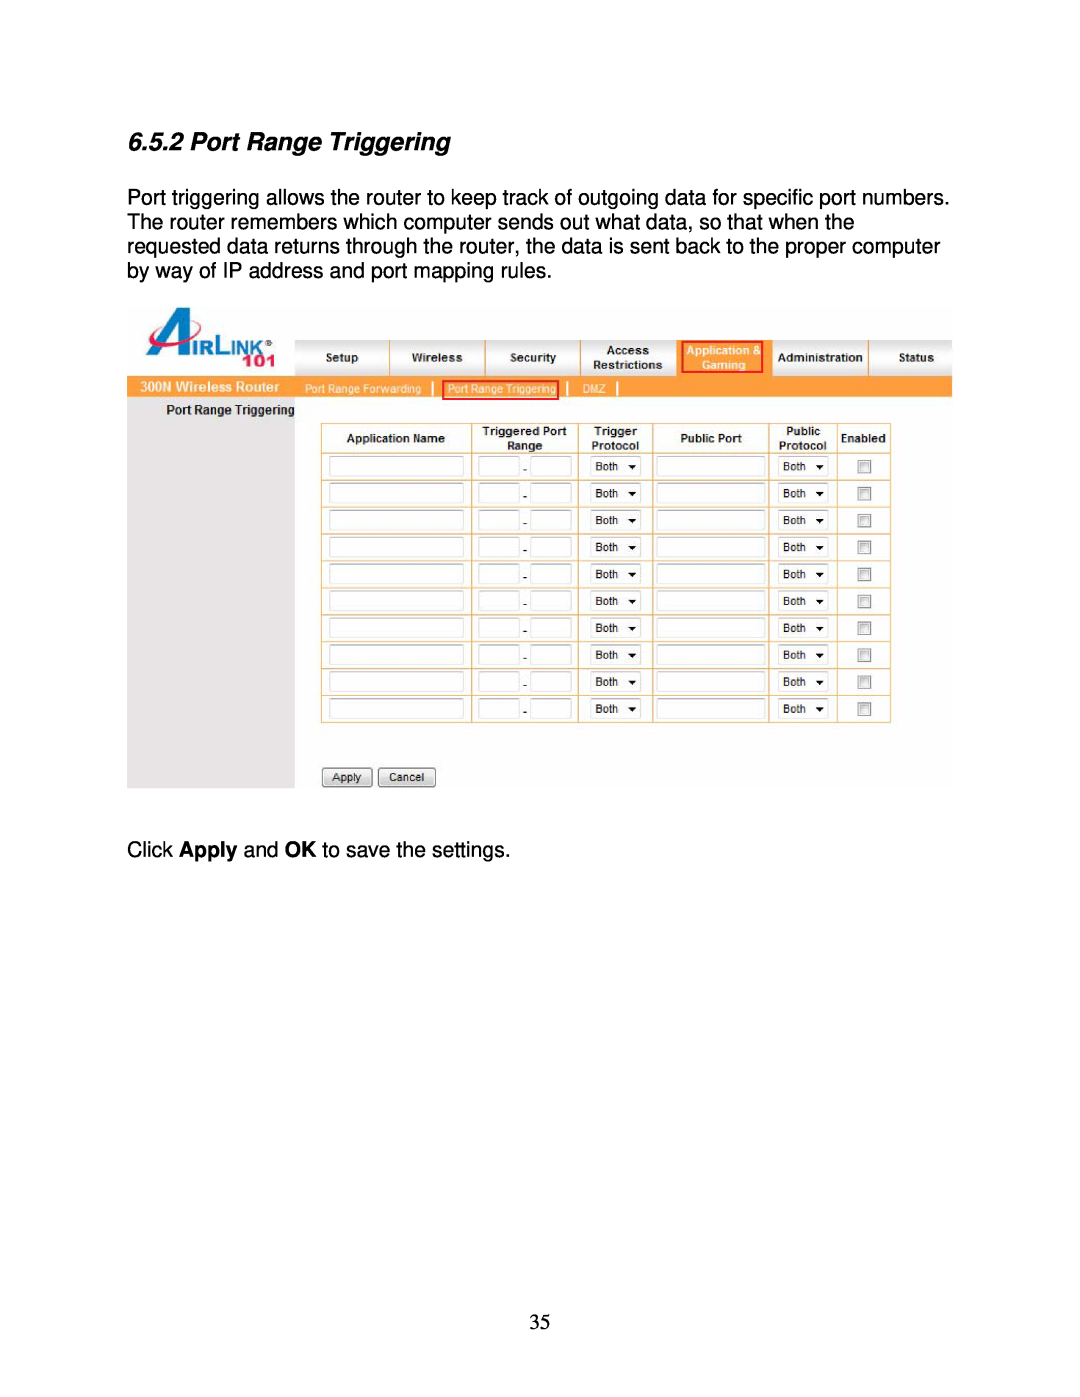 Airlink101 300N user manual Port Range Triggering, Click Apply and OK to save the settings 